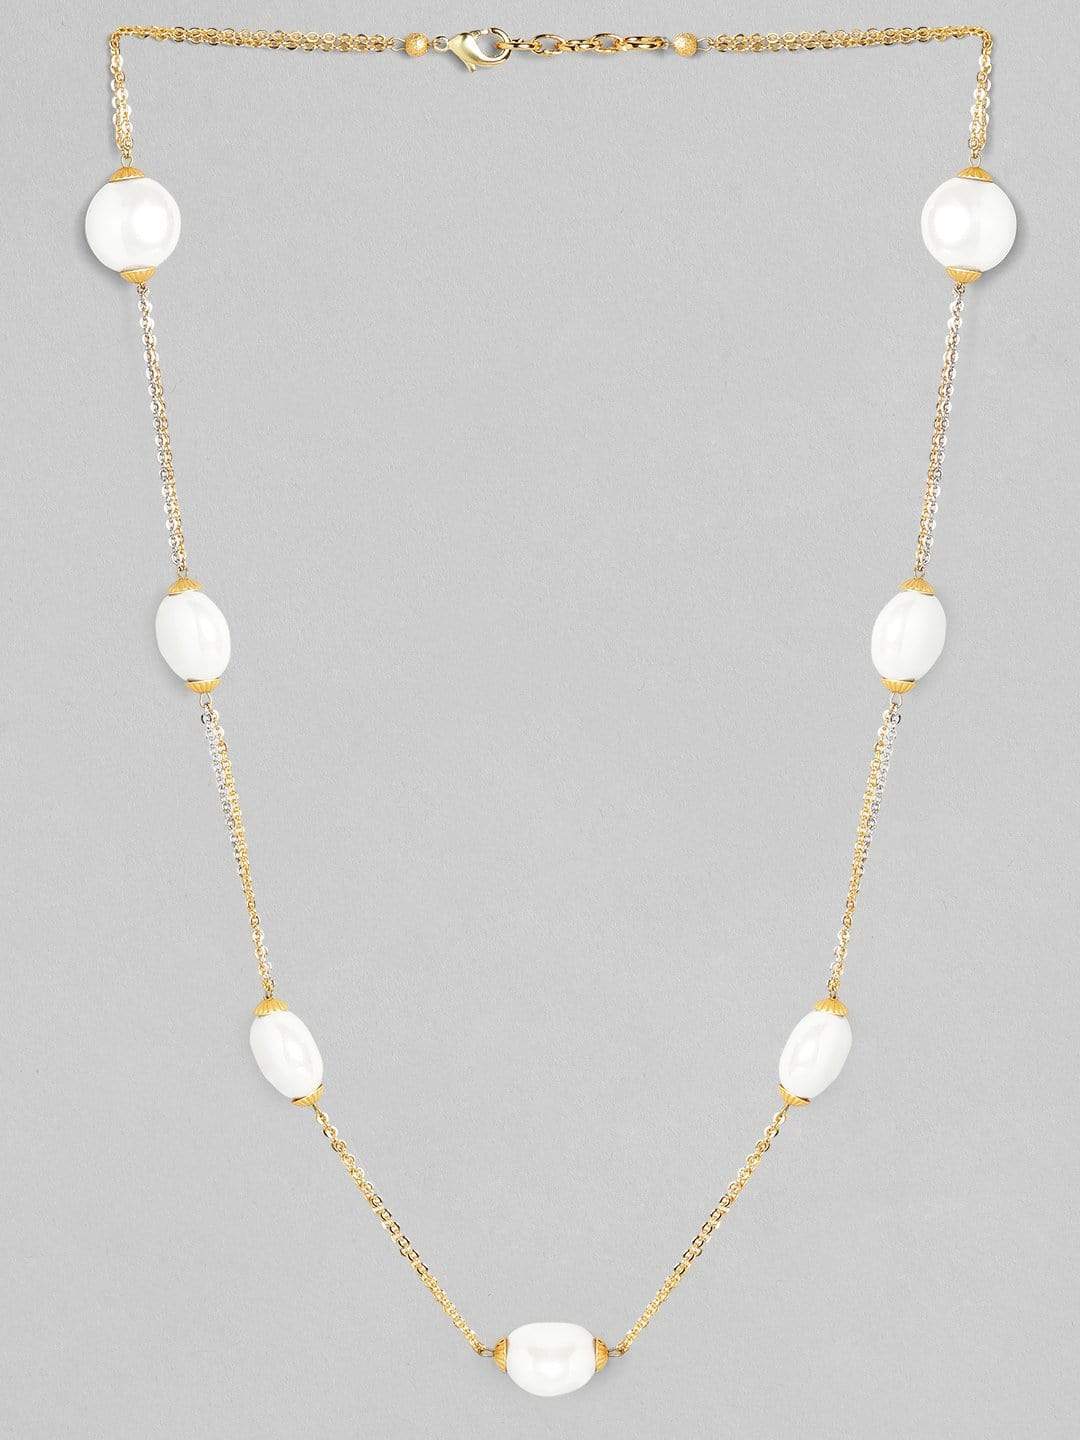 Rubans Gold Plated Contemporary White Beads Minimal Necklace Chain & Necklaces